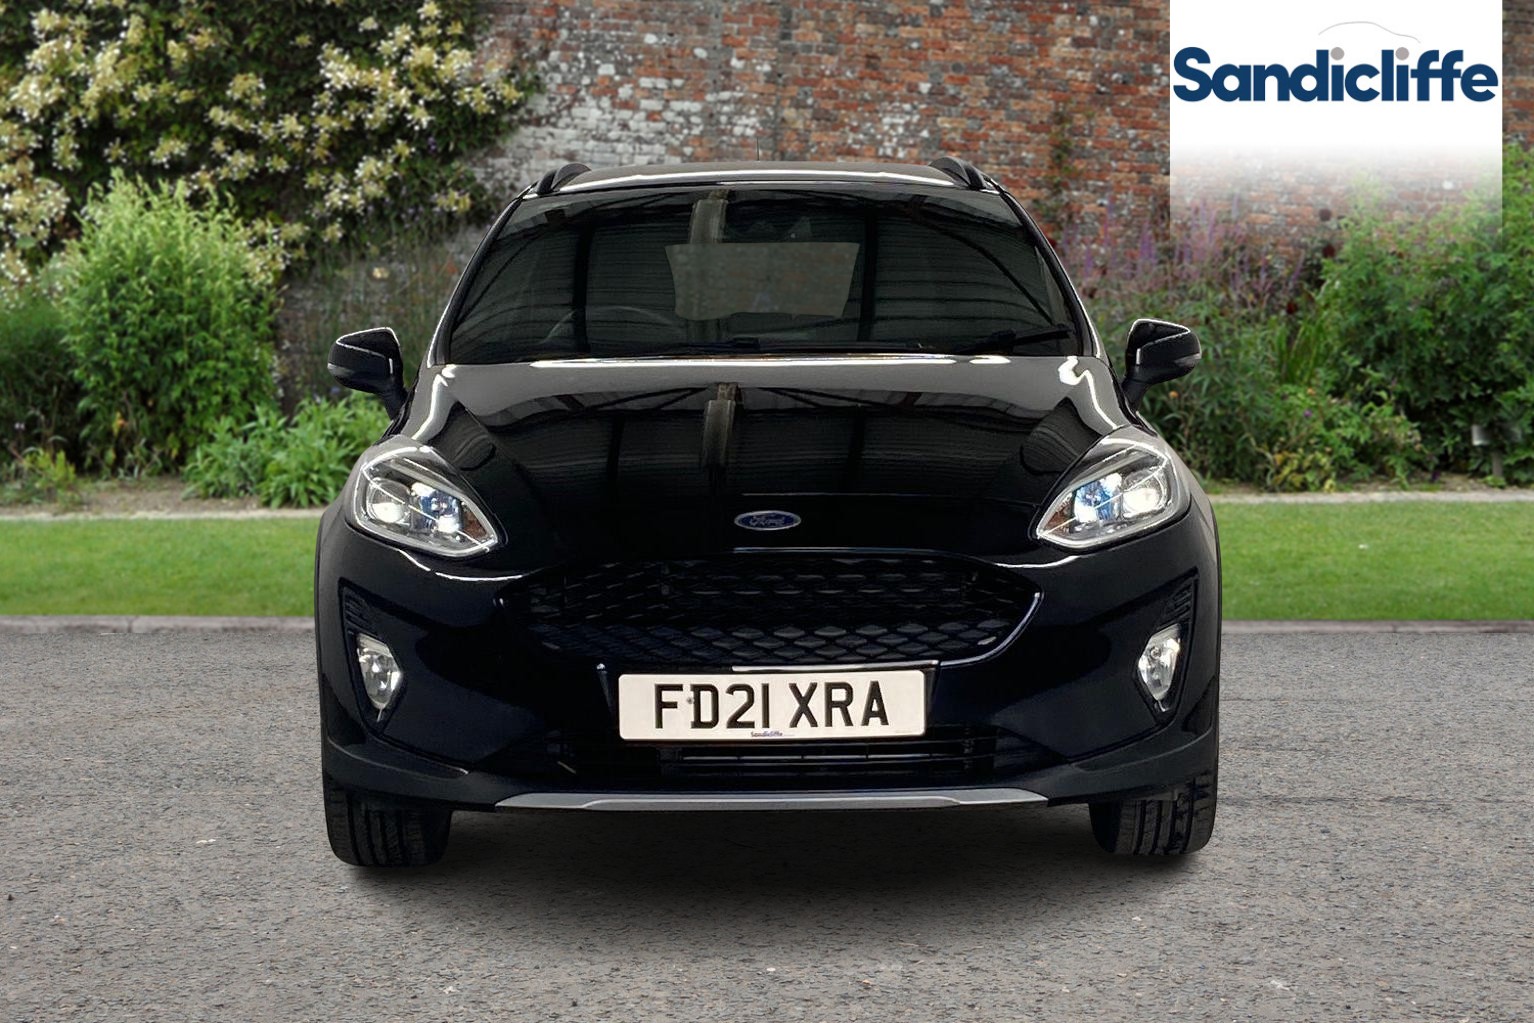 Ford Fiesta Active 1.0 EcoBoost 95 Active Edition 5dr